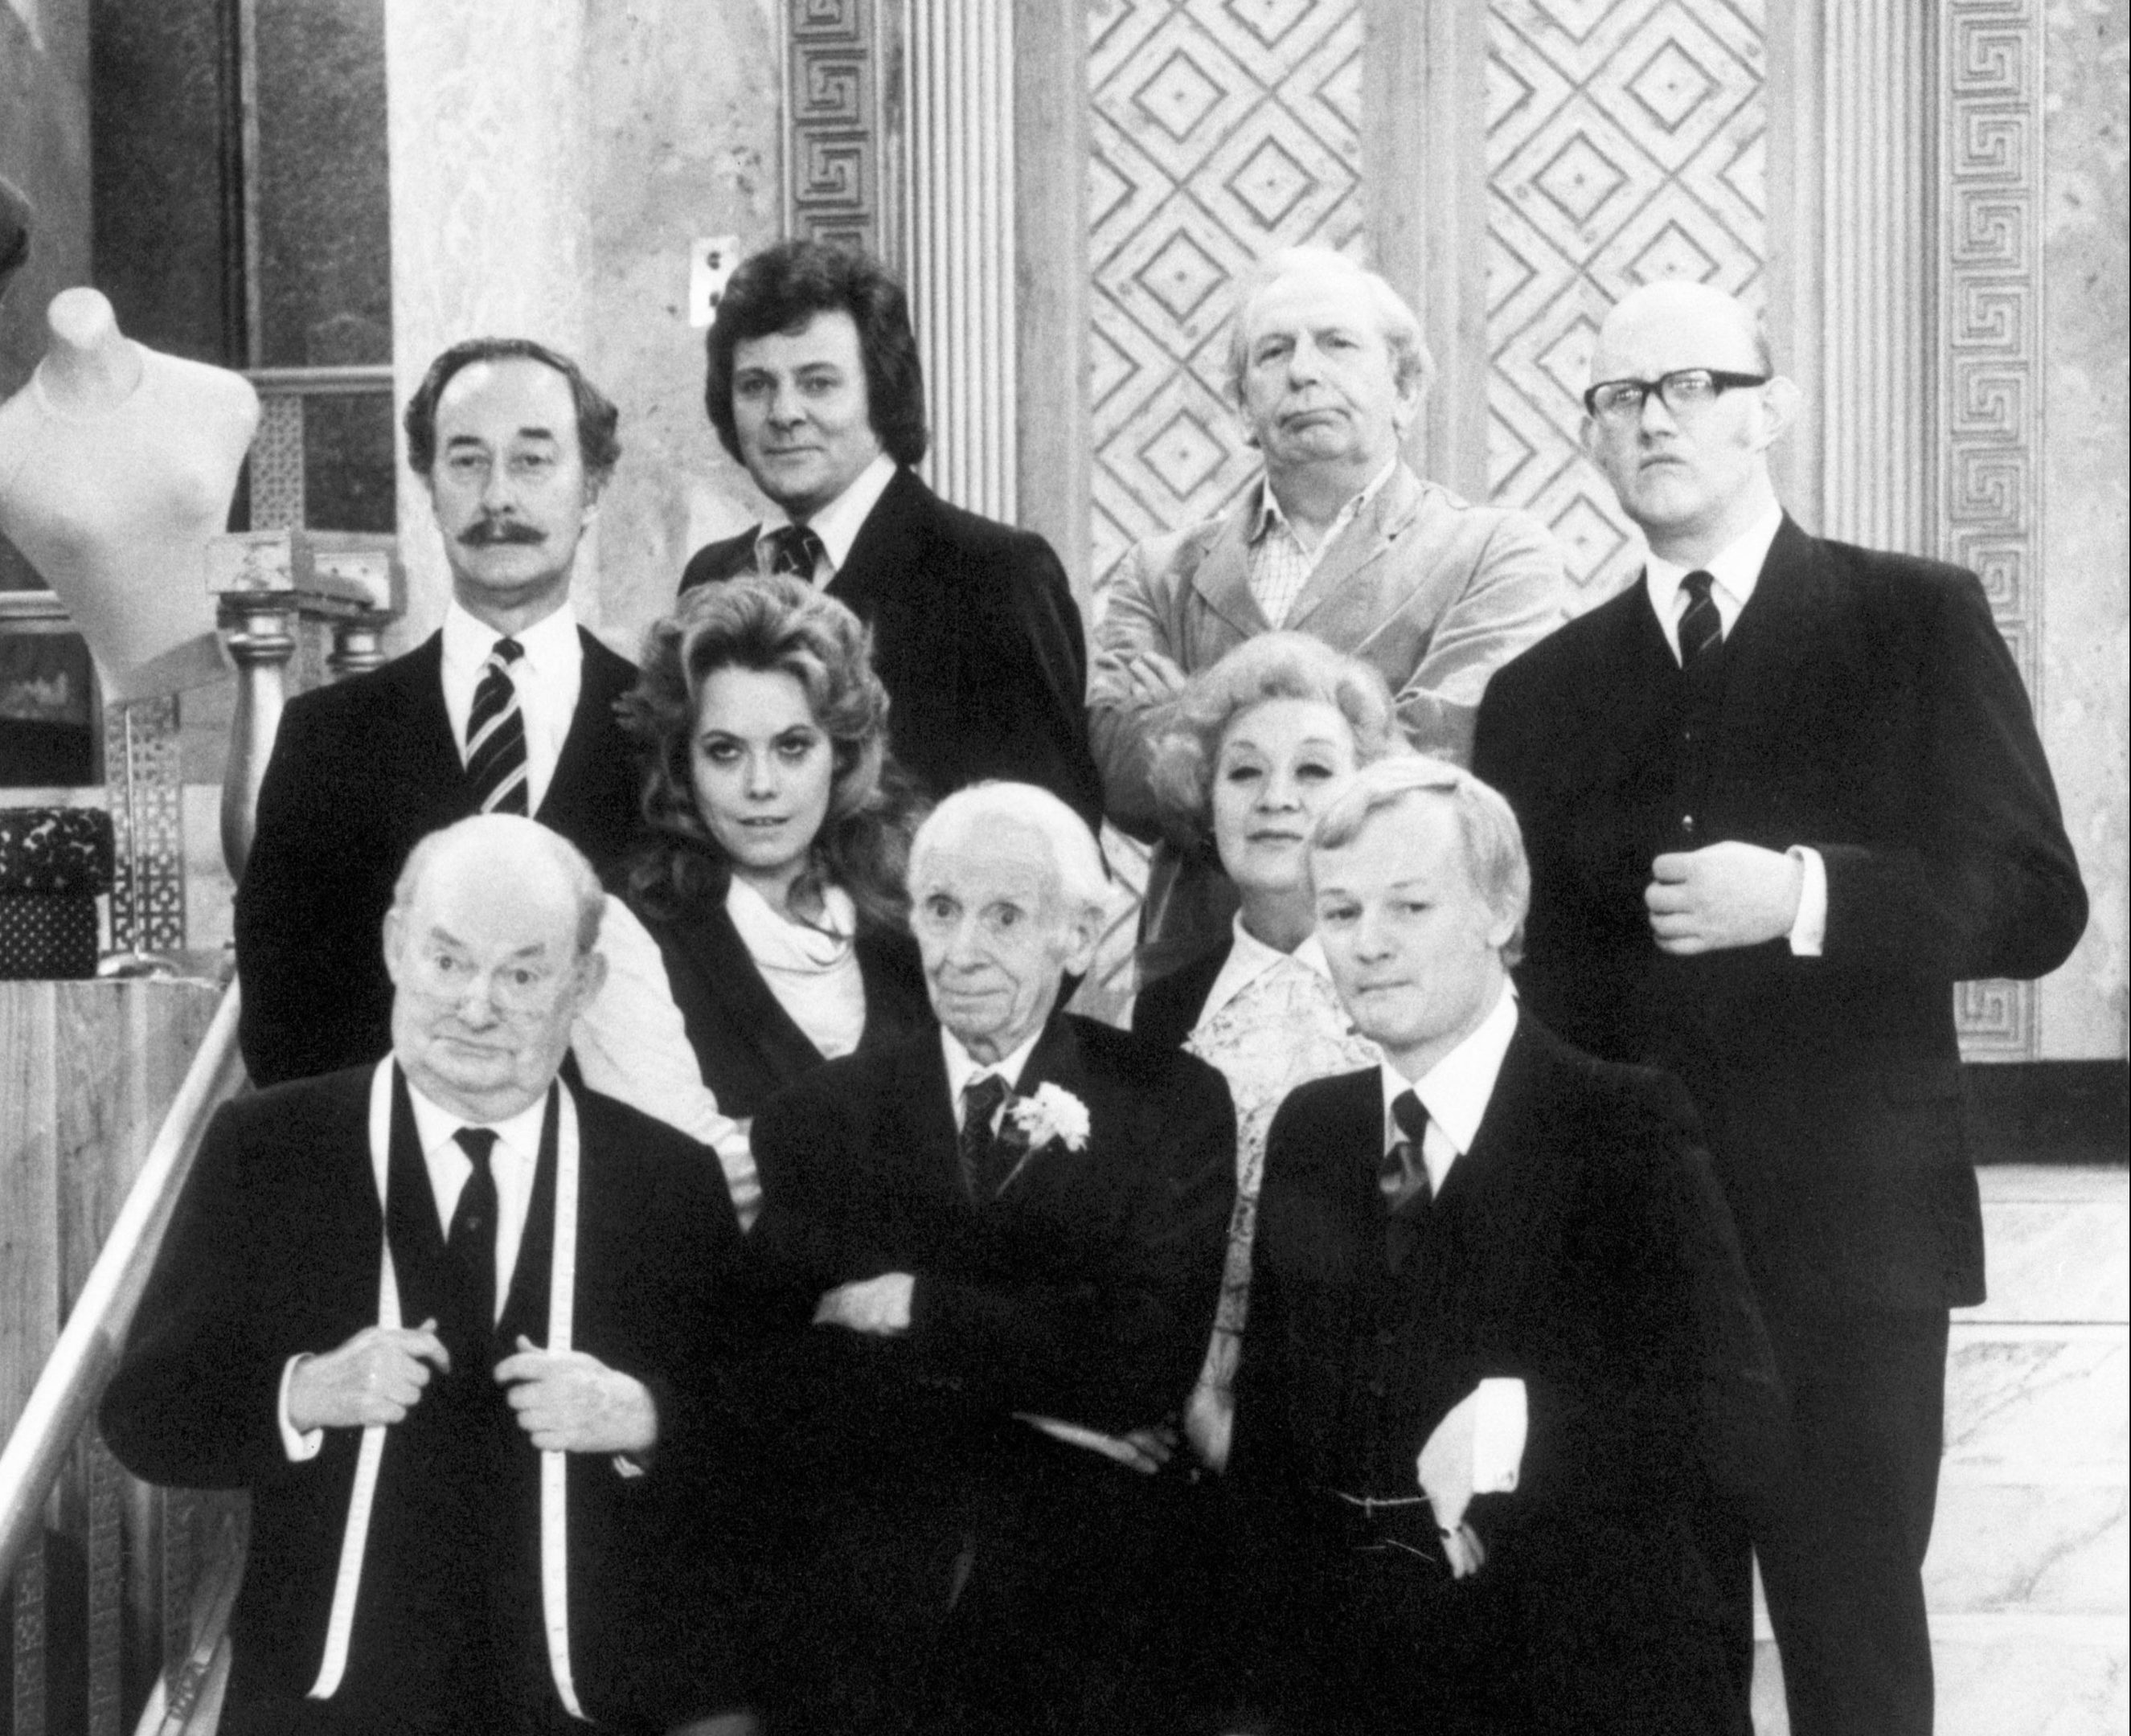 Cast members on set during filming of the BBC sitcom Are You Being Served. (top l-r) Frank Thornton (Captain Stephen Peacock), Trevor Bannister (Mr. Dick/James Lucas), Arthur English (Mr. Beverley/Harry Harman) and Nicholas Smith (Mr. Cuthbert Rumbold). (middle l-r) Wendy Richard (Miss Shirley Brahms) and Mollie Sugden (Mrs. Betty Slocombe) (front l-r) Arthur Brough (Mr. Ernest Grainger), Harold Bennett (Young Mr. Grace) and John Inman (Mr. Wilberforce Claybourne Humphries) (PA)